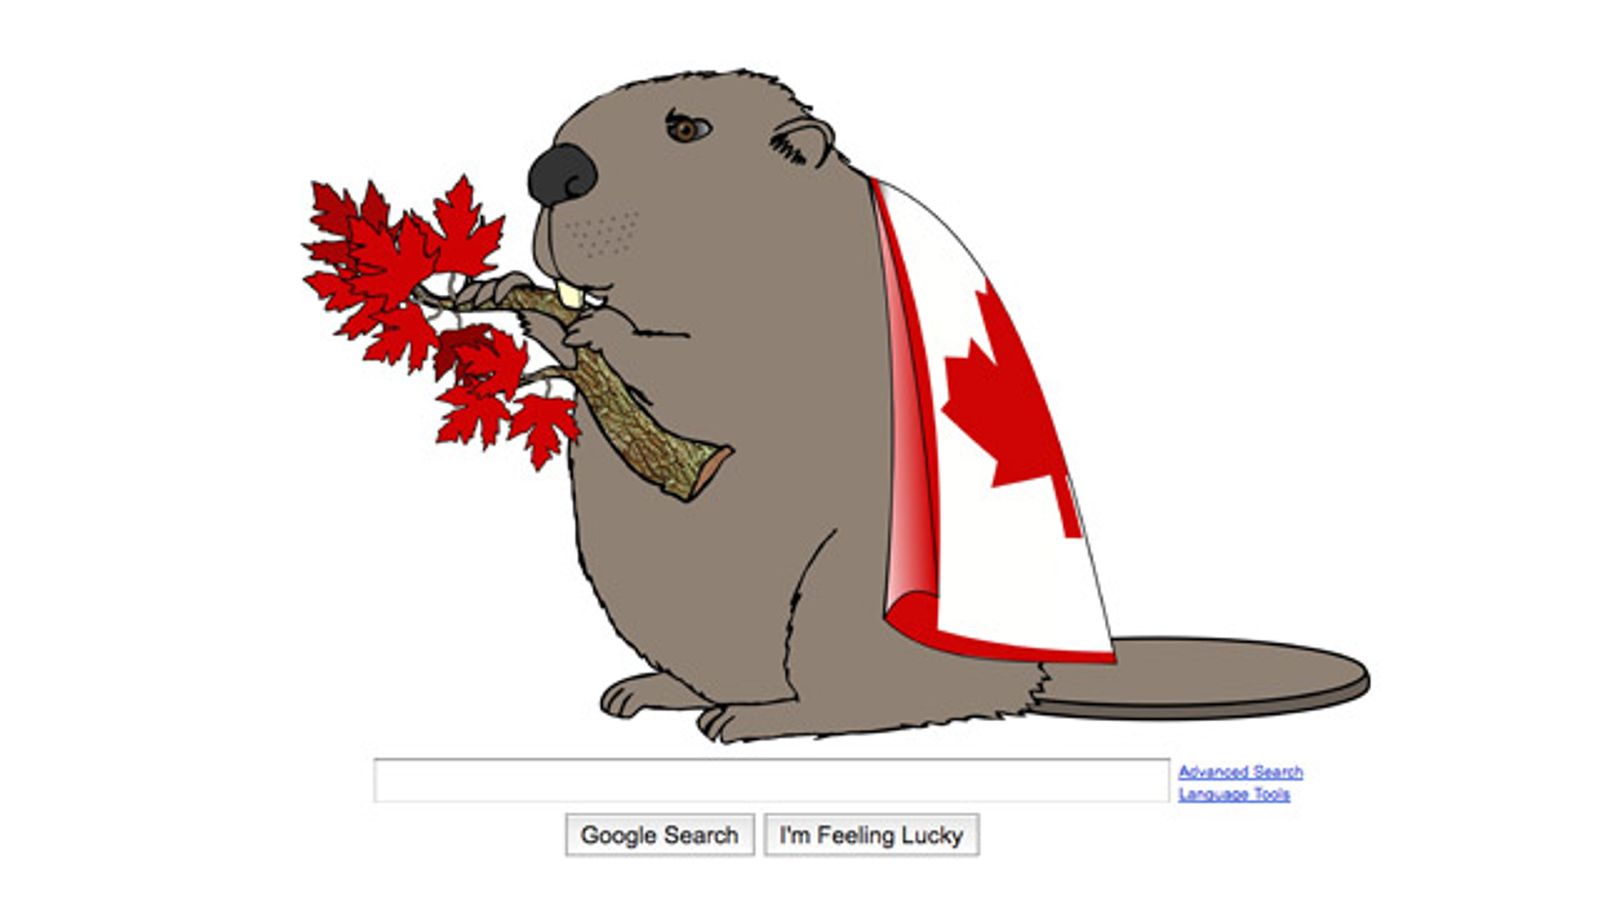 Internet Porn Filters Force Name Change on 'The Beaver'